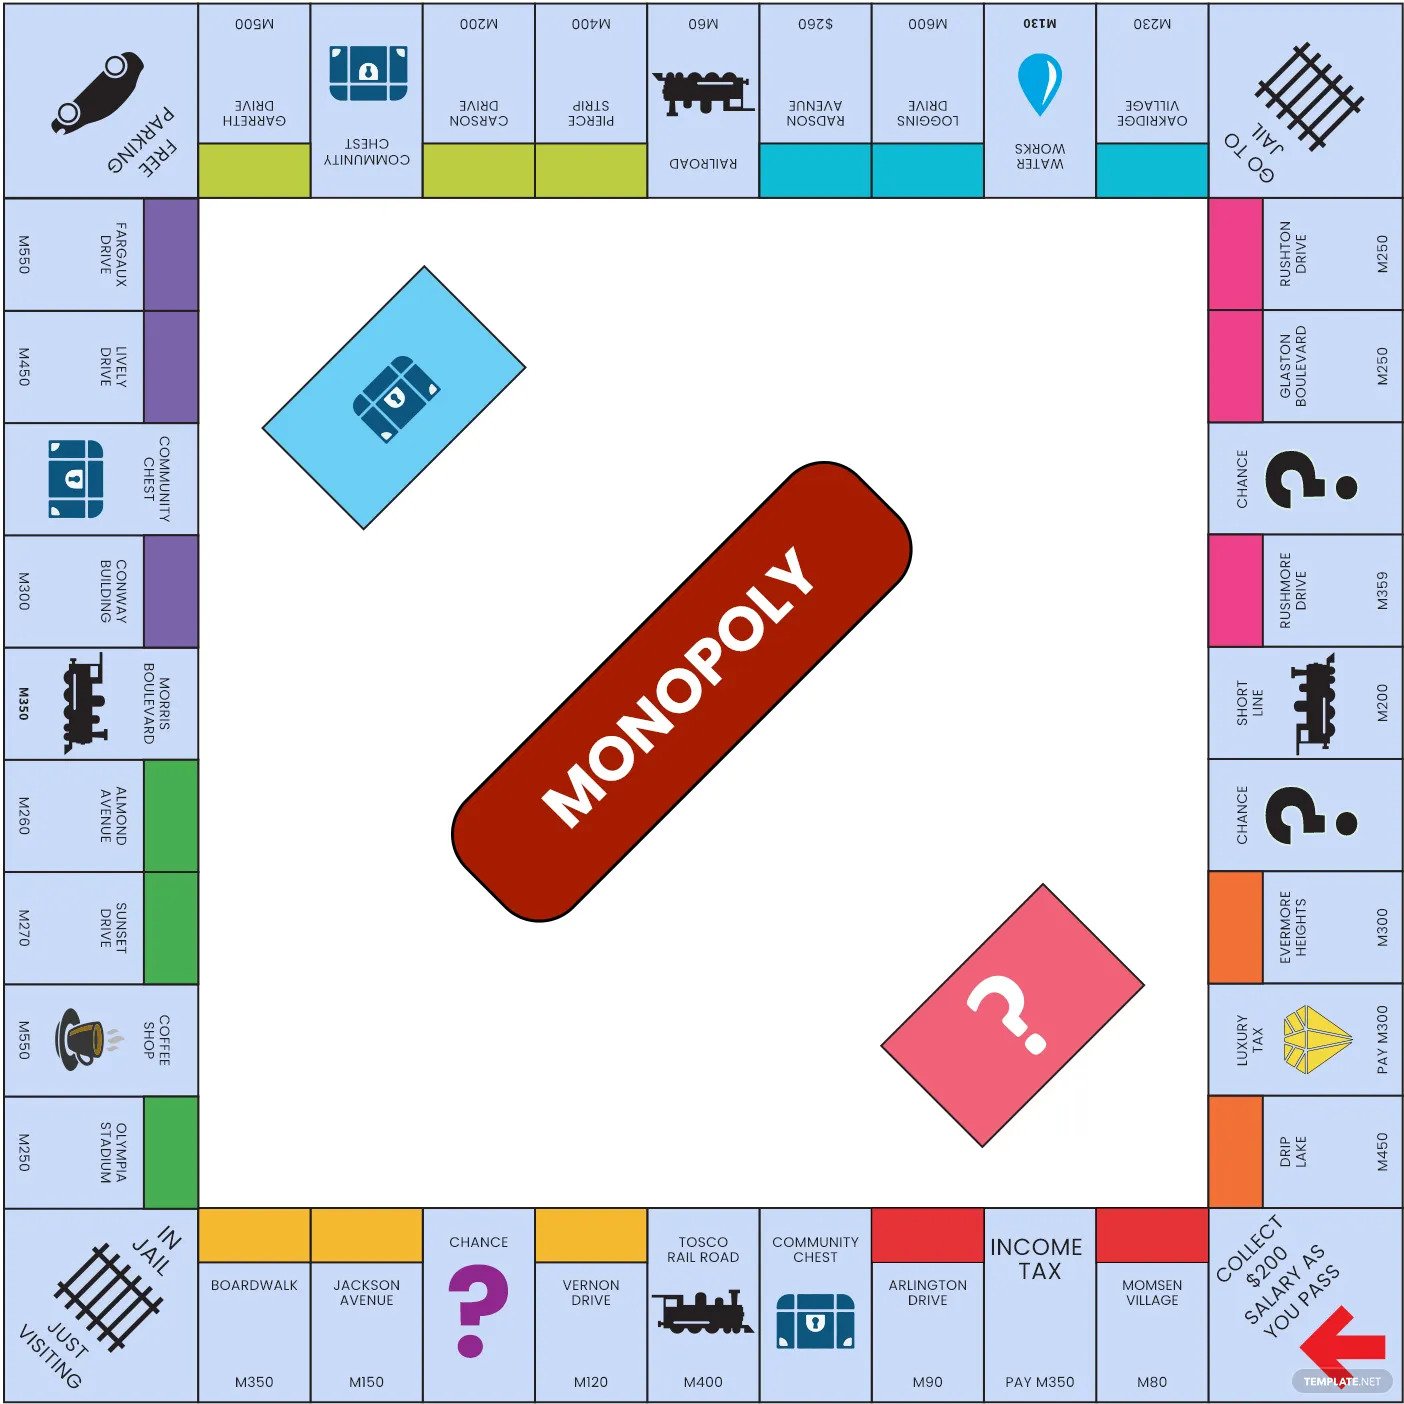 monopoly board themes